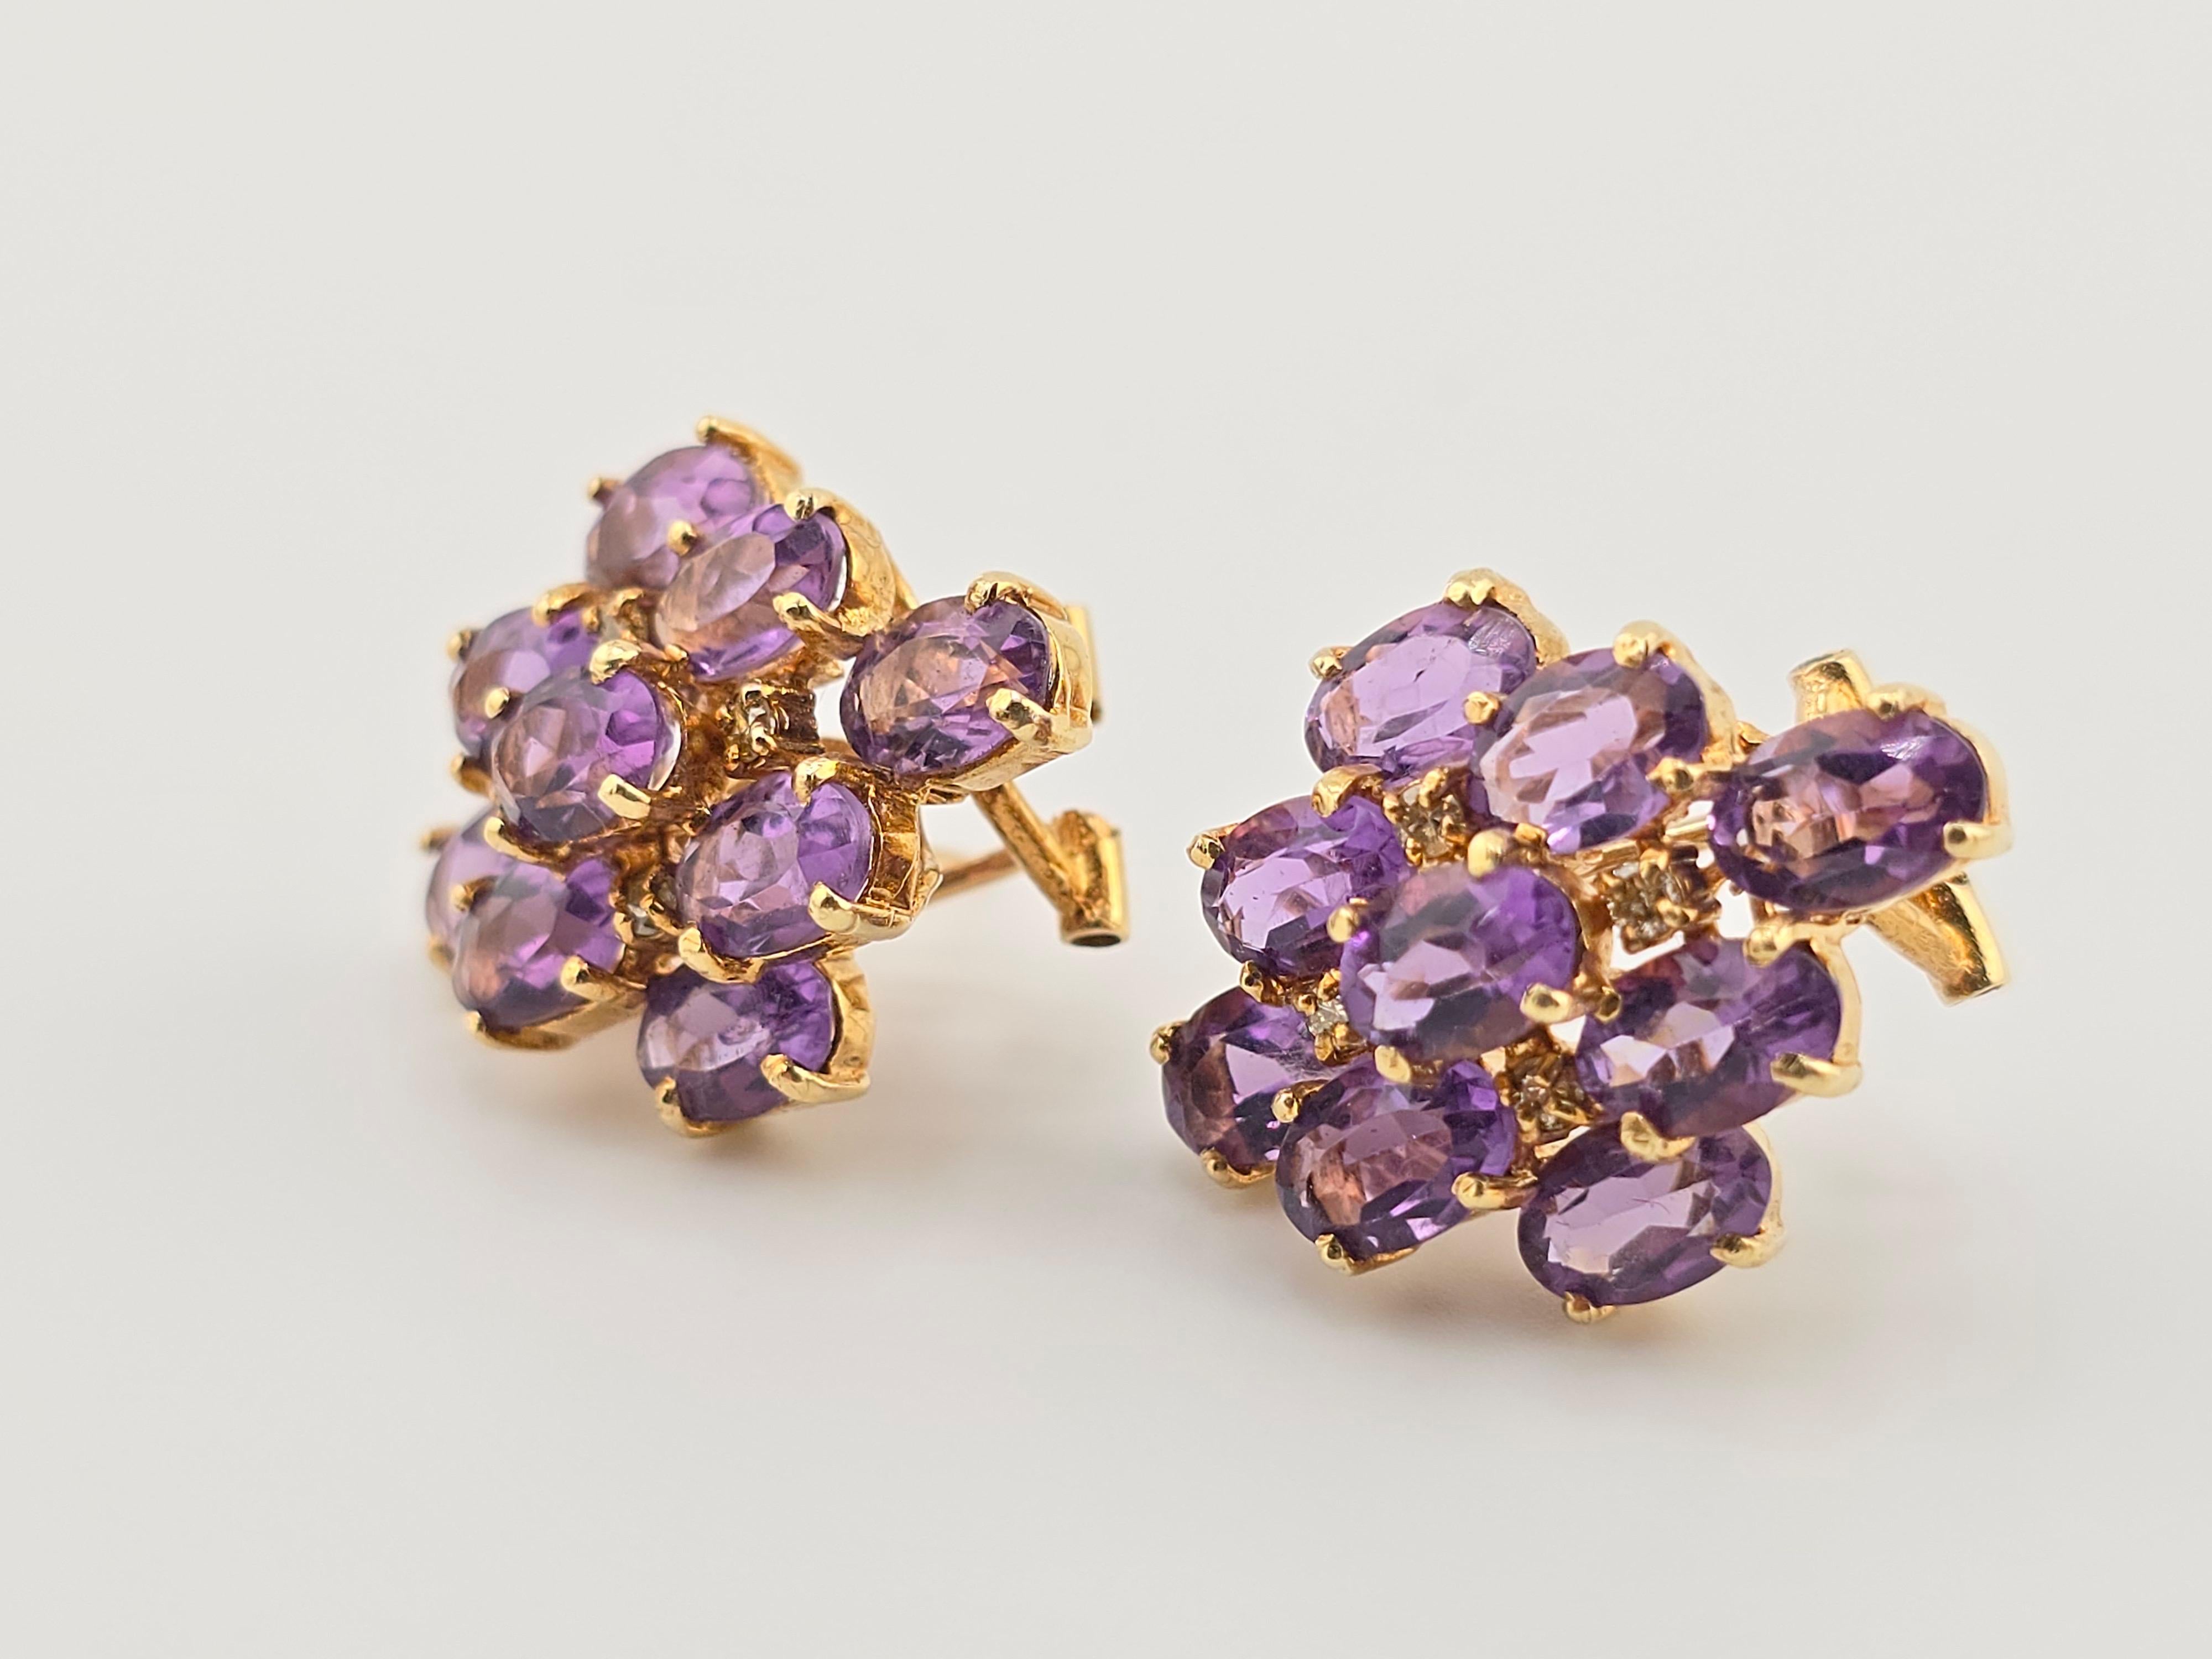 Exceptional 14K Yellow Gold Earrings with Amethyst Omega Clip Backs  In Good Condition For Sale In Media, PA